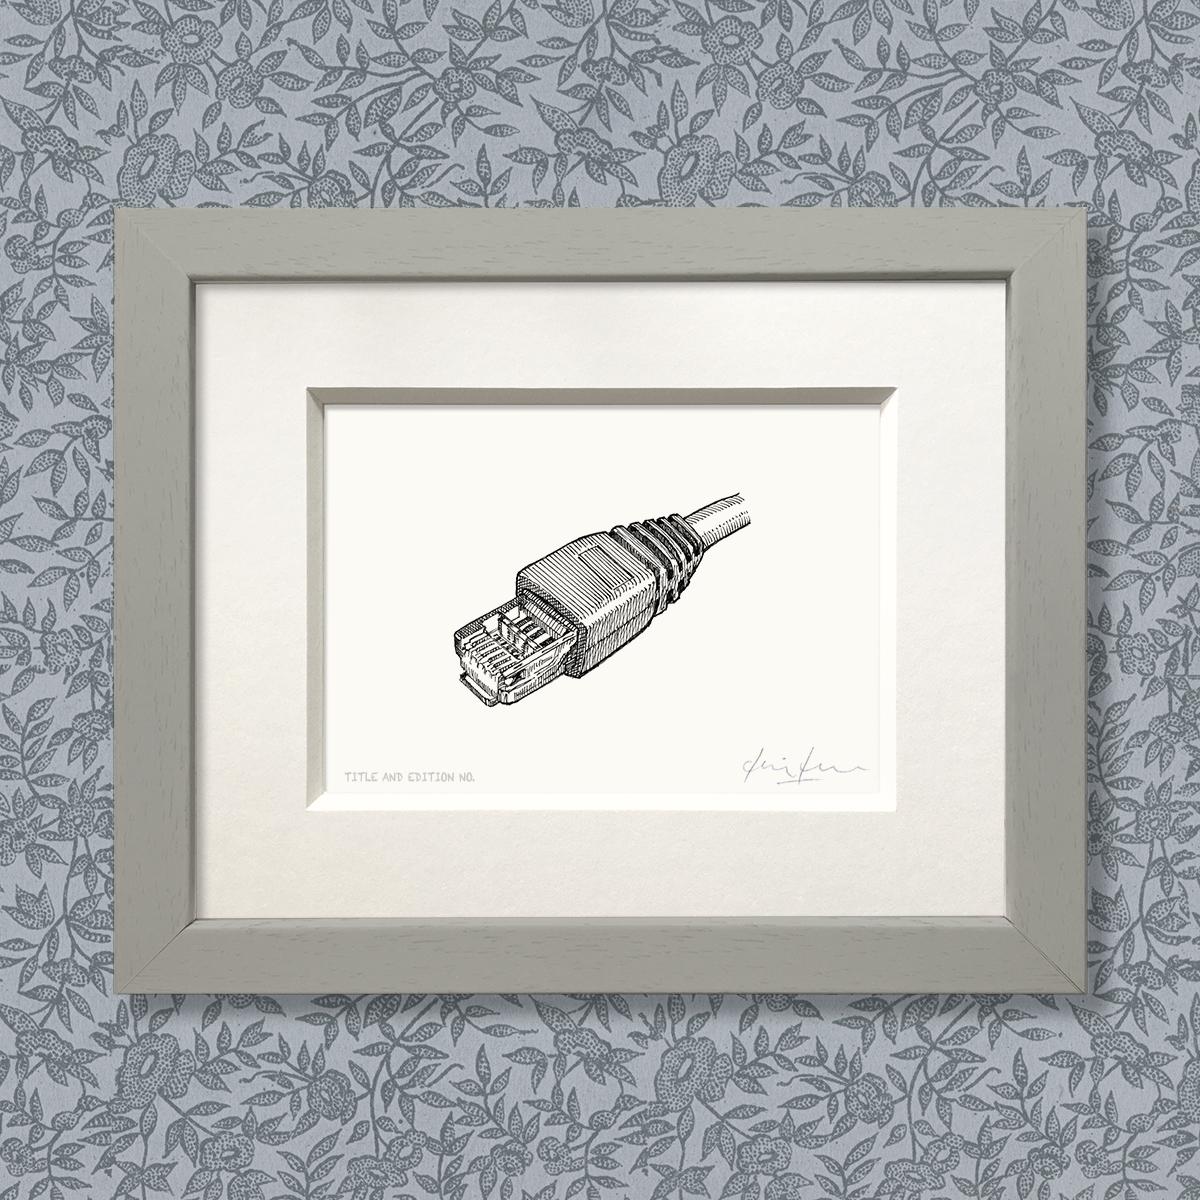 Limited edition print from pen and ink drawing of an ethernet connector in a grey frame